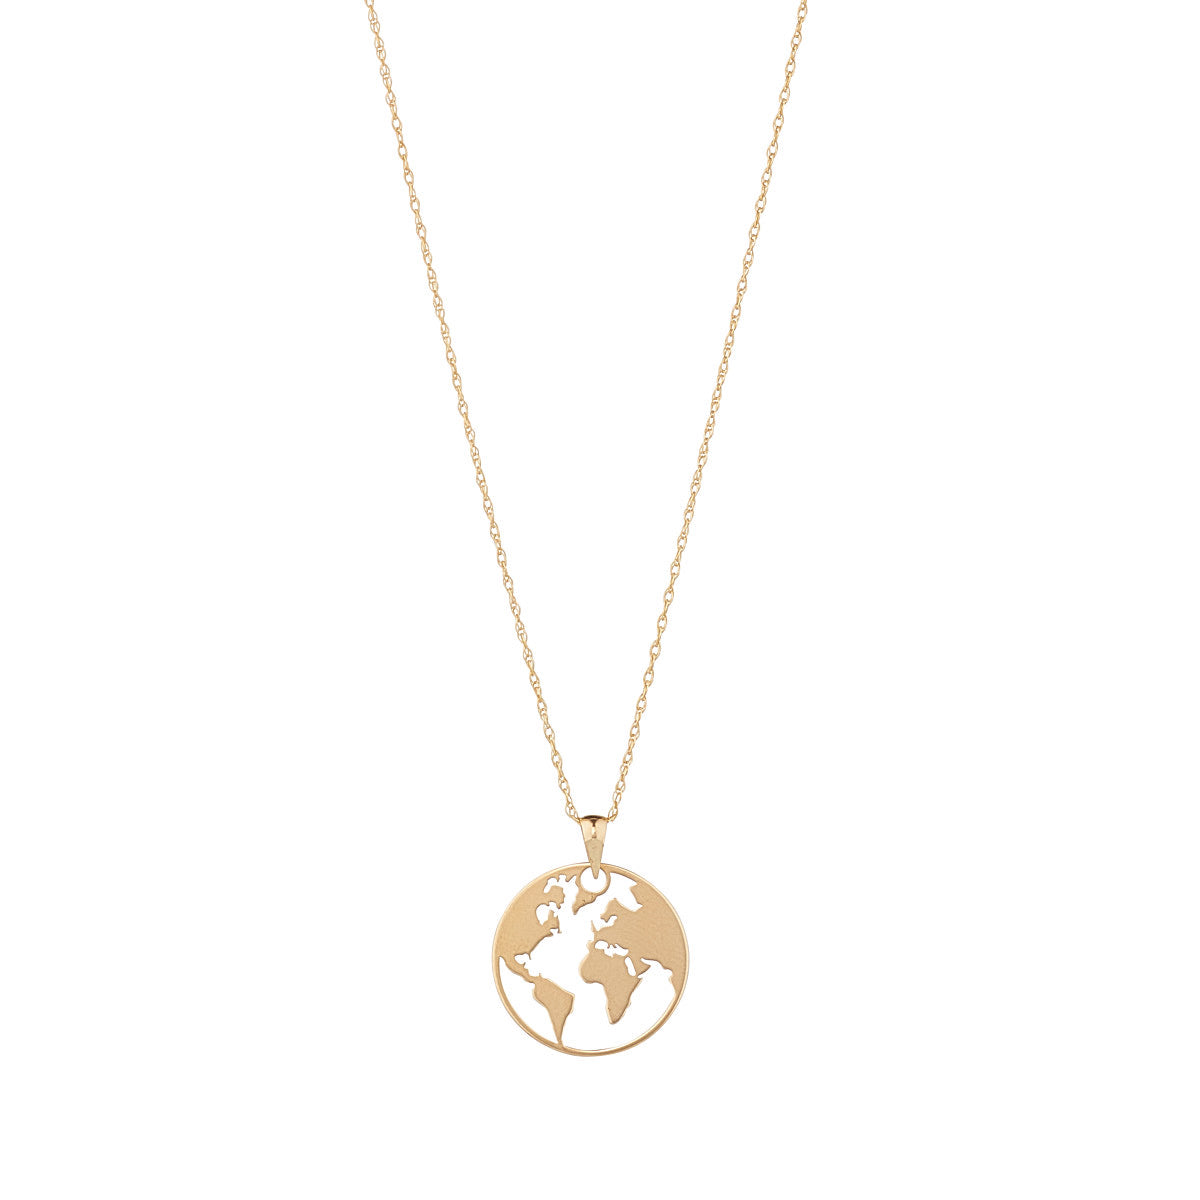 9ct Gold World Necklace - John Ross Jewellers